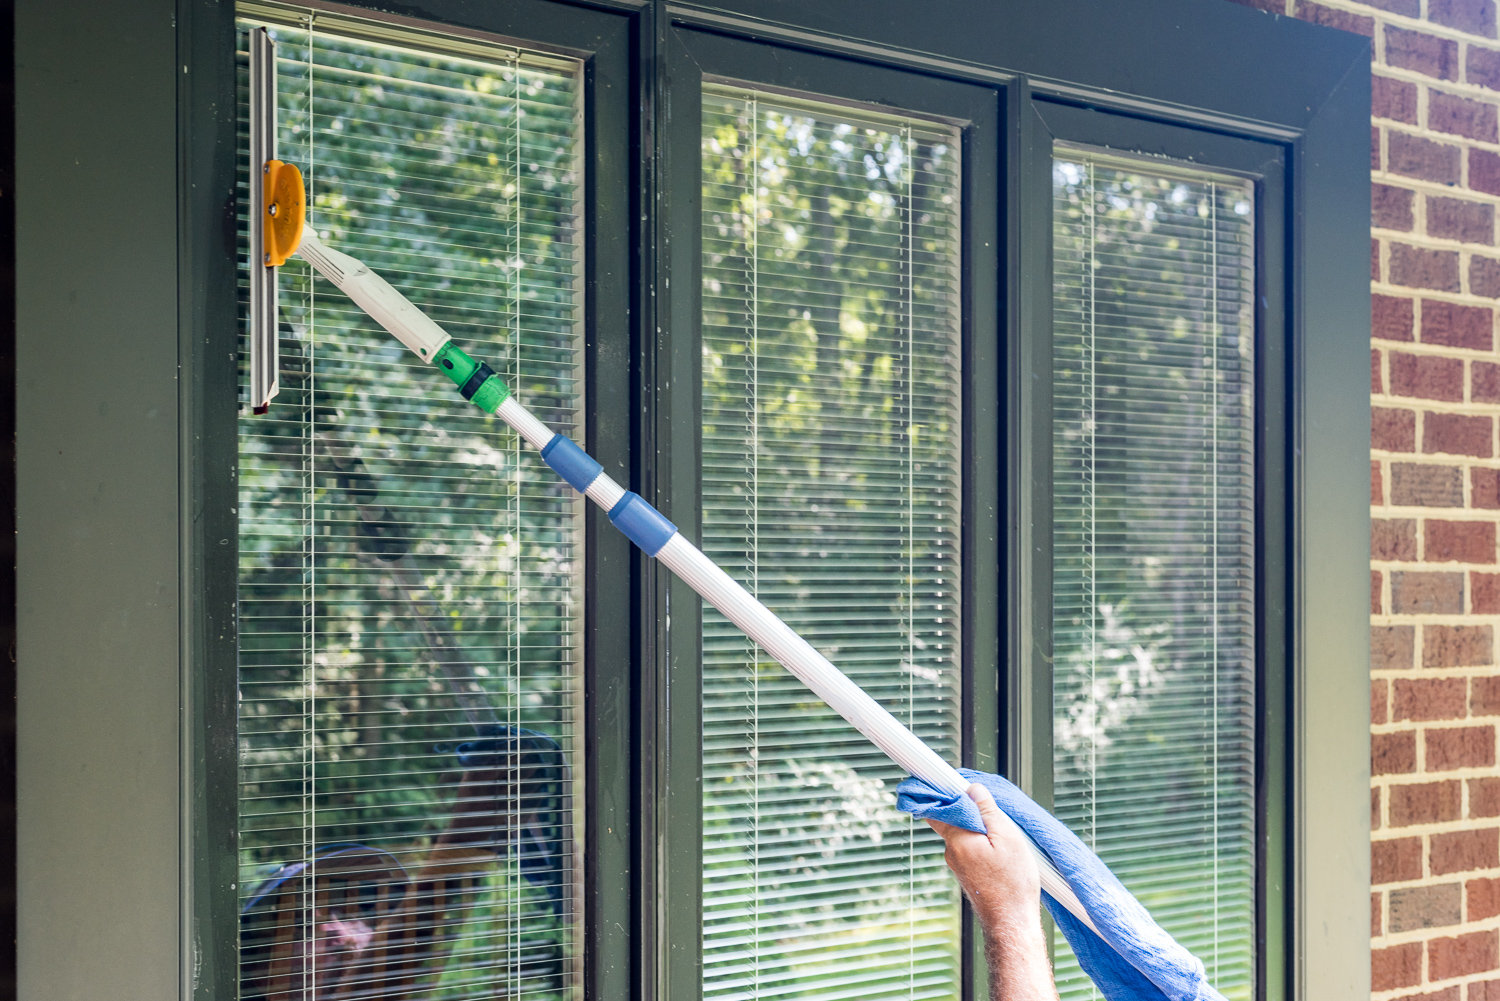 We make your windows clear and clean in Richmond, VA.